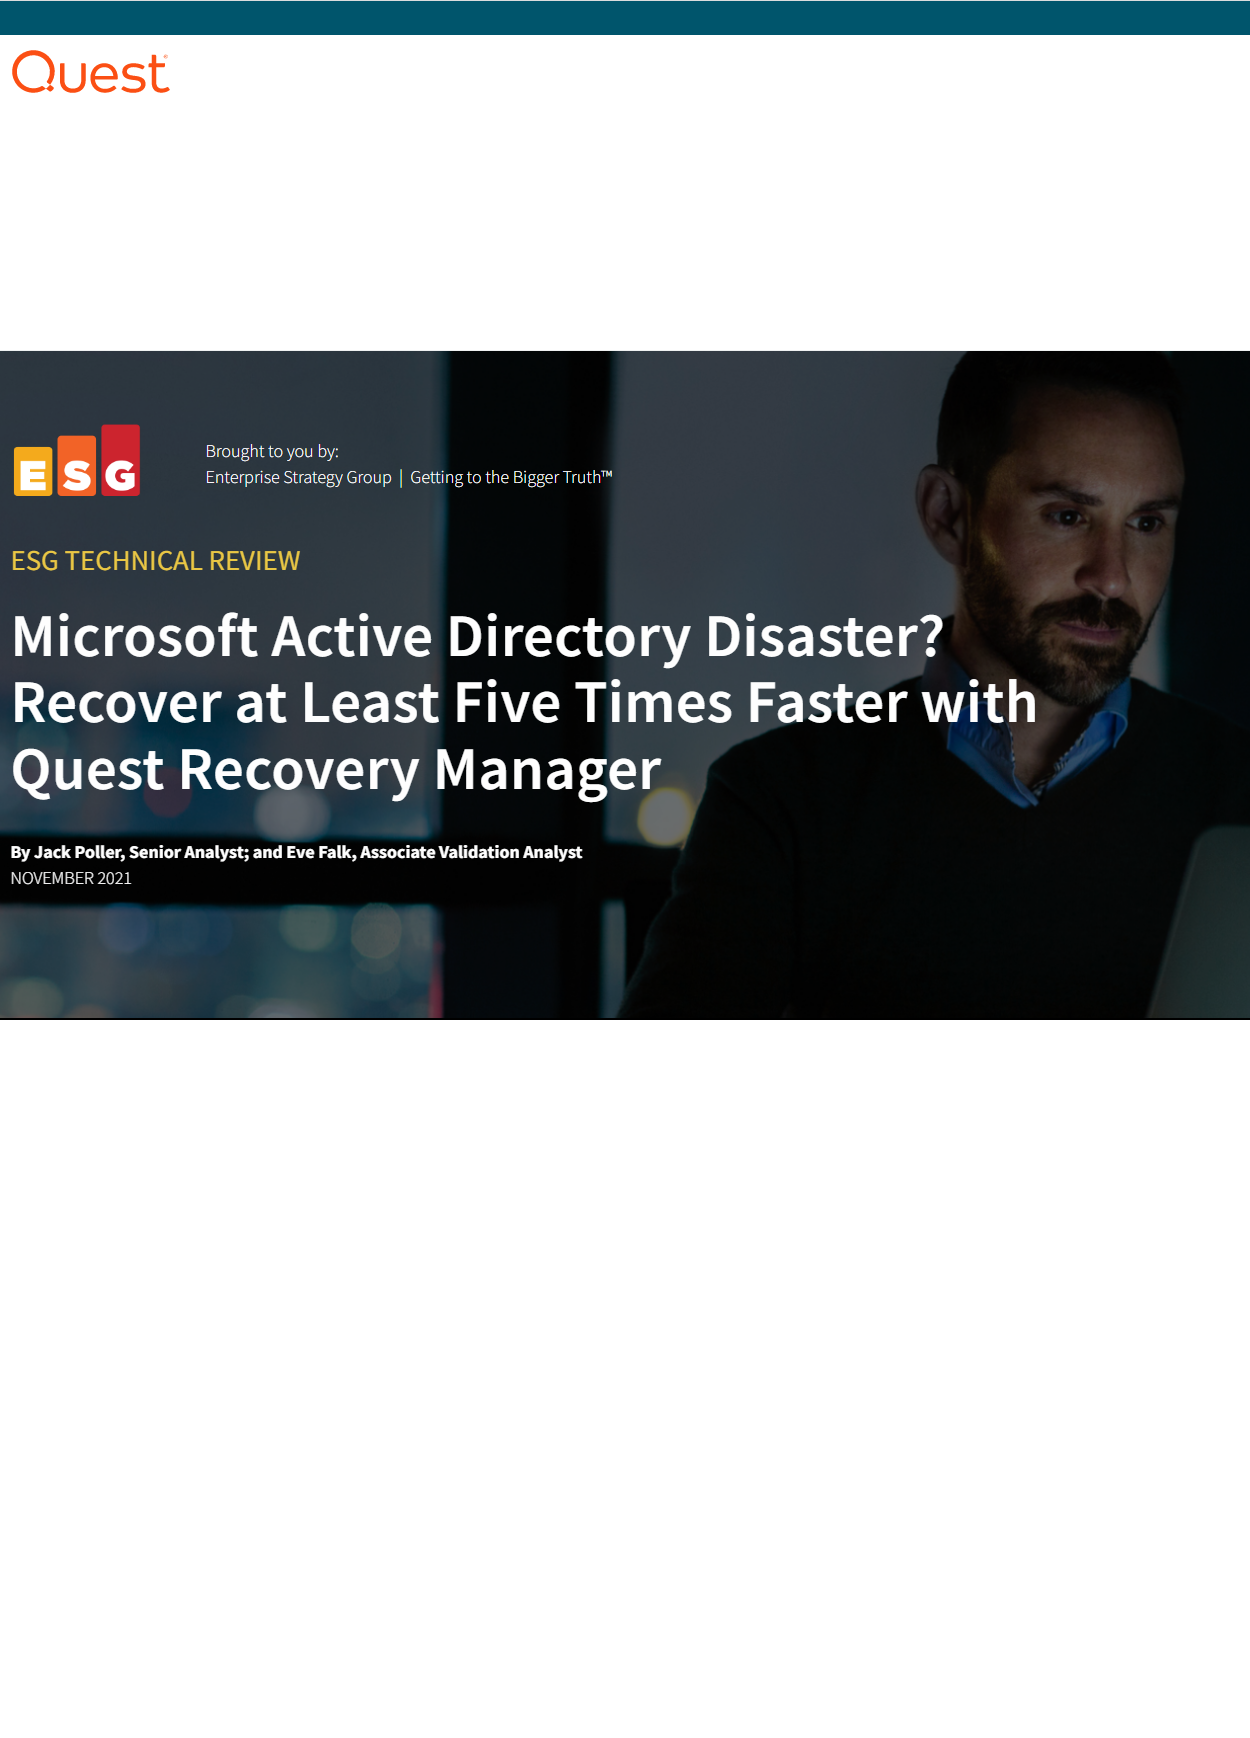 Microsoft Active Directory Disaste? Recover at Least Five Times Faster with Quest Recovery Manager